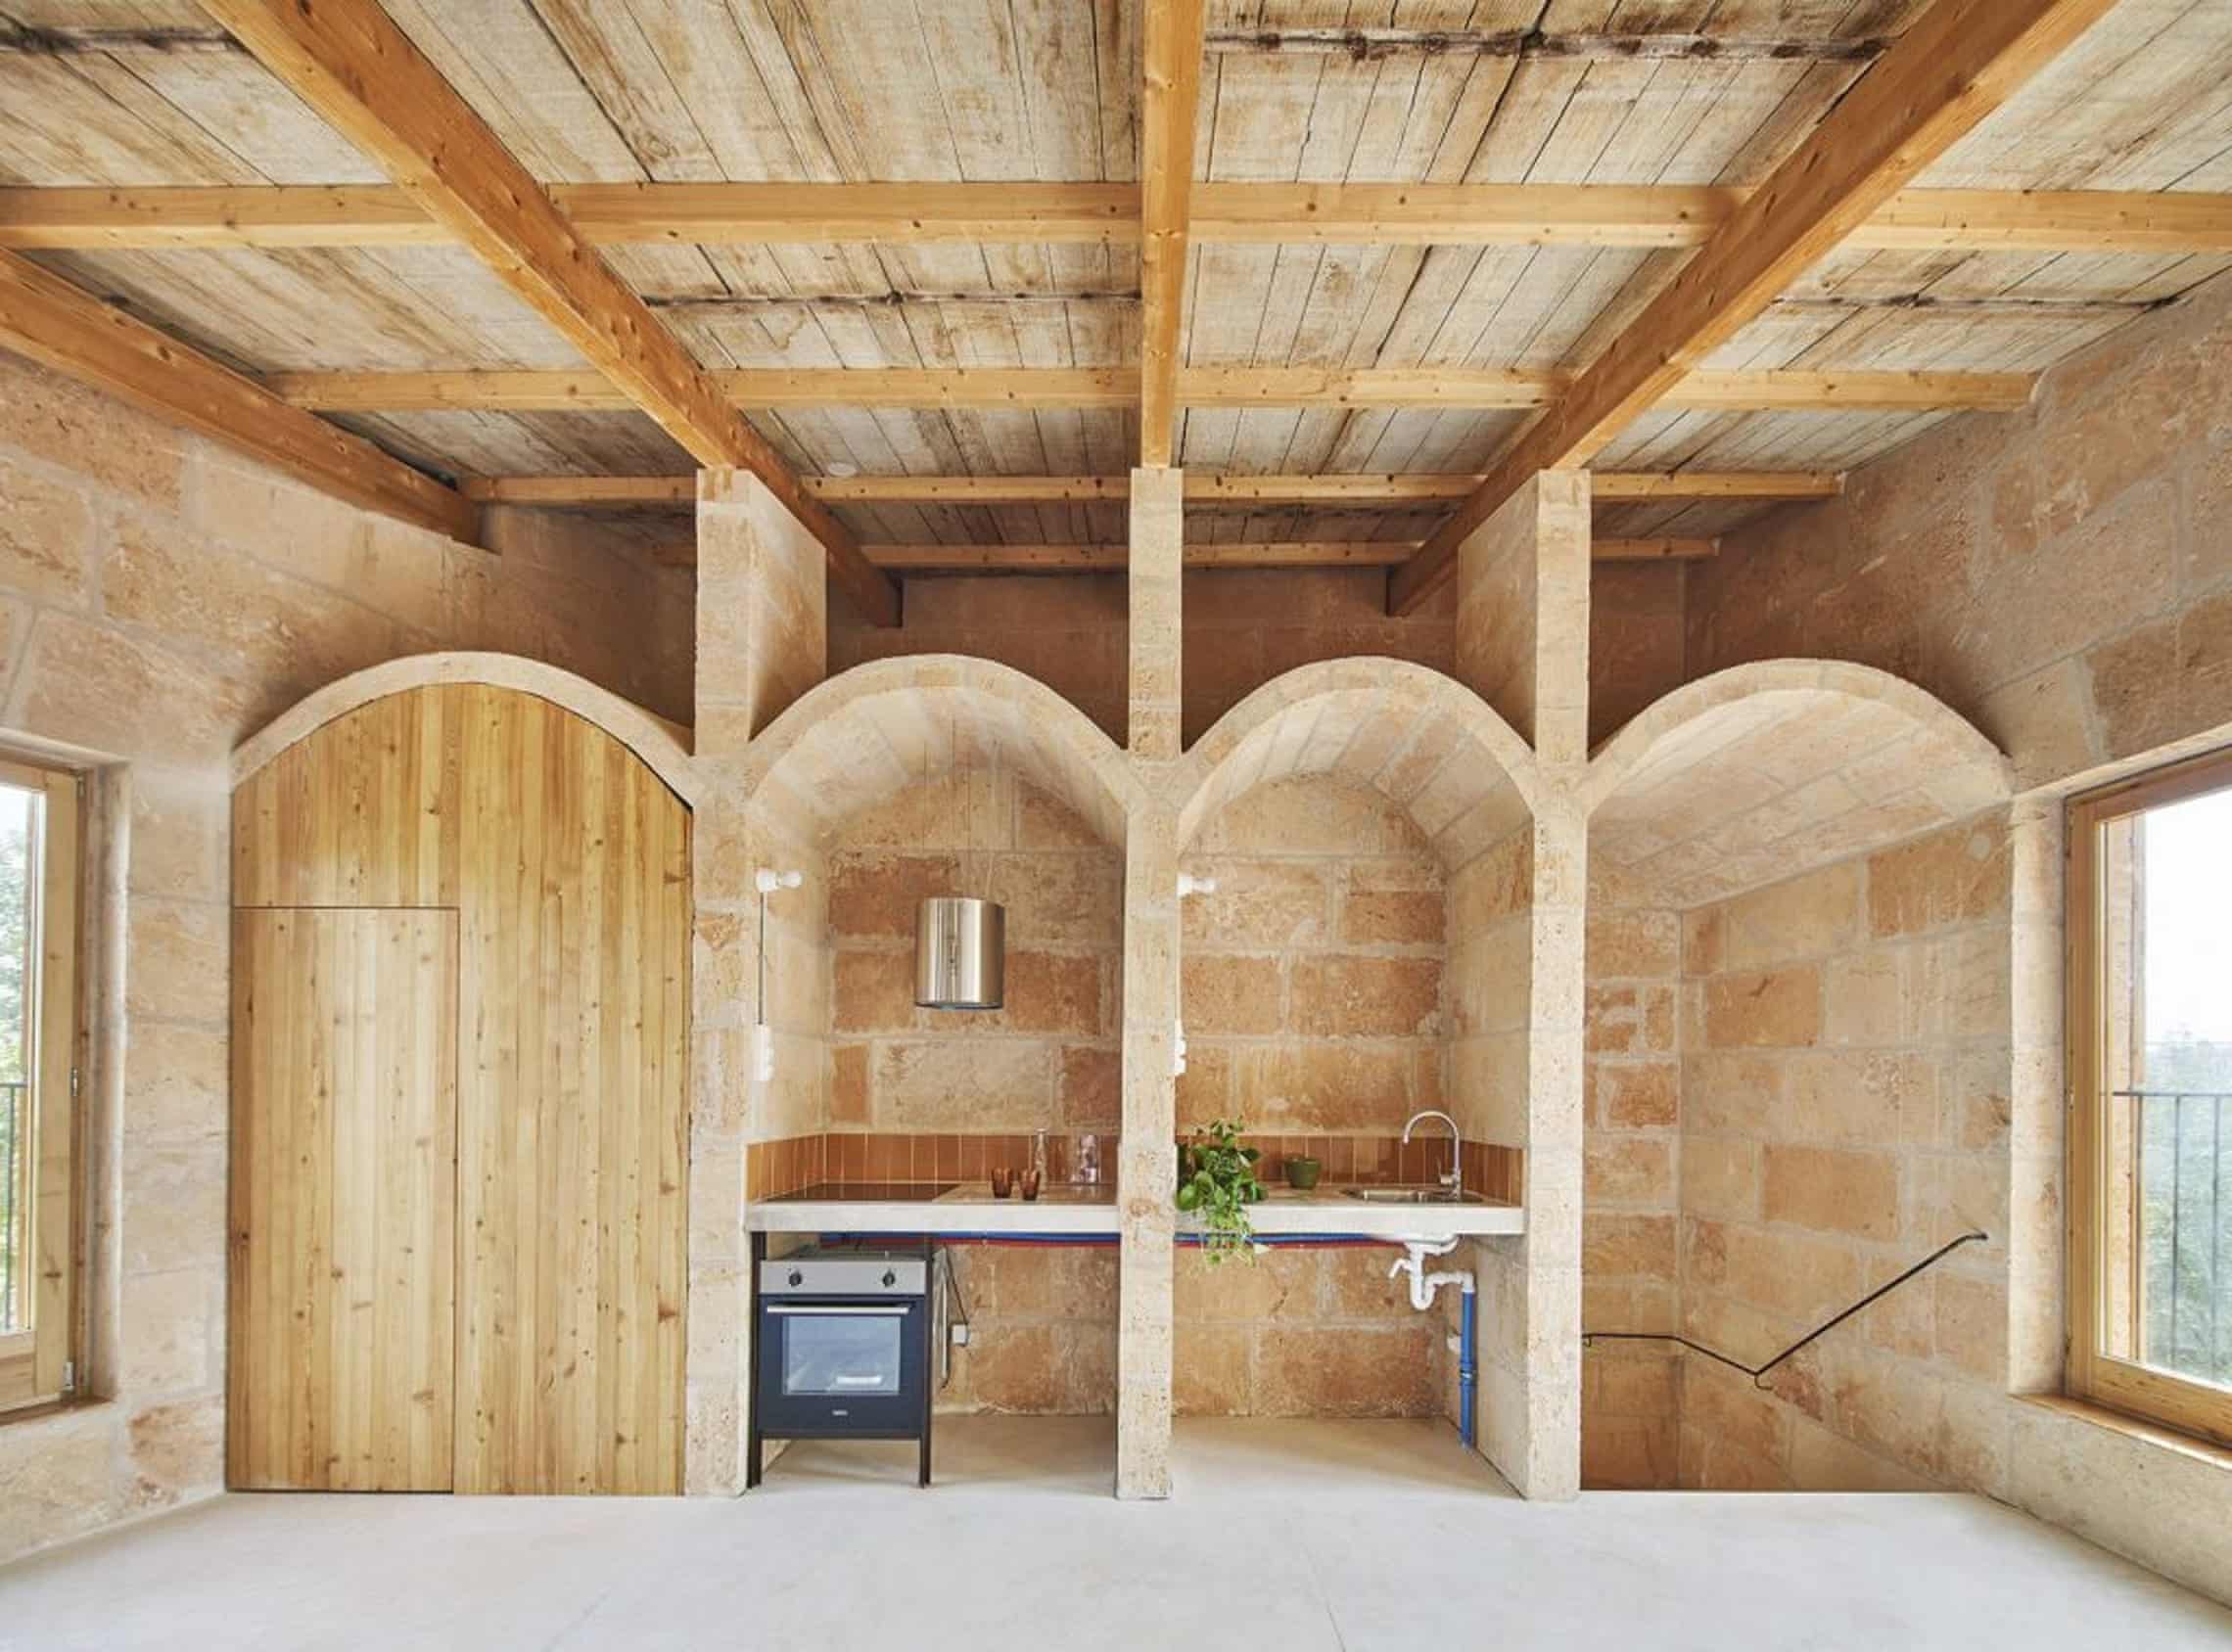 Everyday luxury: affordable housing near Palma, Mallorca, built by Balearic social housing institute Ibavi, constructed from load‑bearing stone quarried locally. Photograph: José Hevia